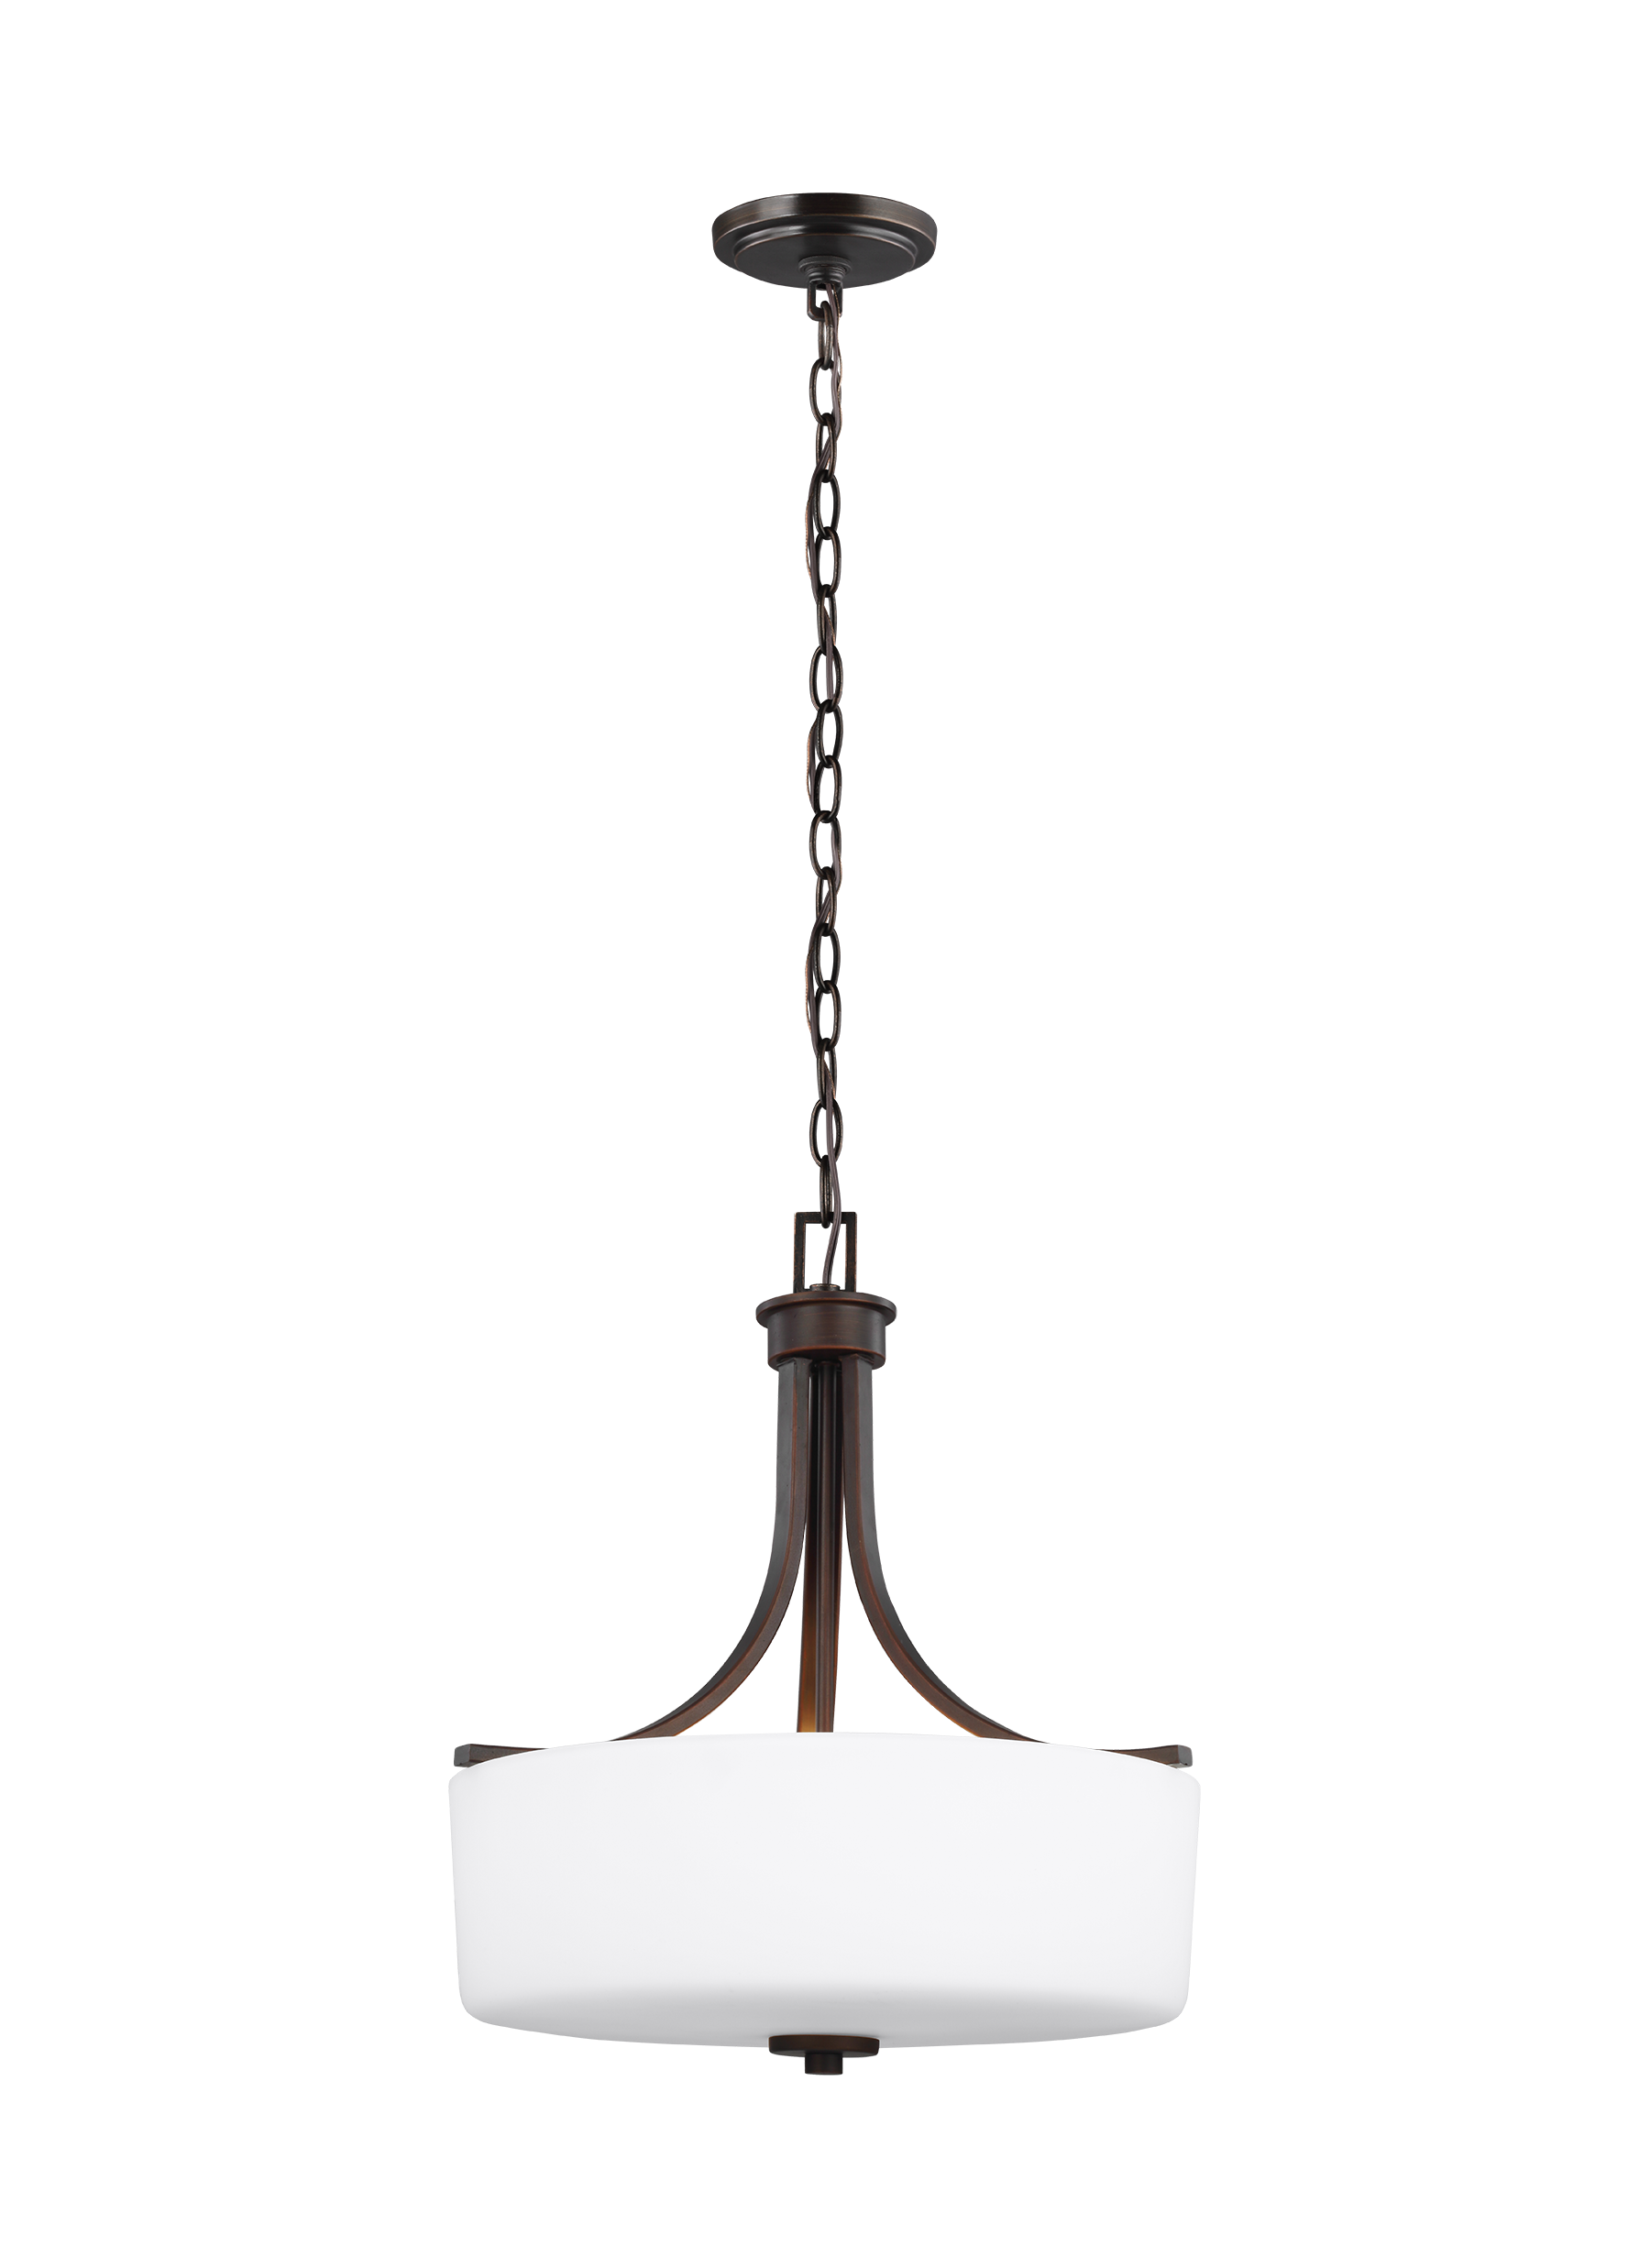 Canfield modern 3-light indoor dimmable ceiling pendant hanging chandelier pendant light in bronze finish with etched whit...